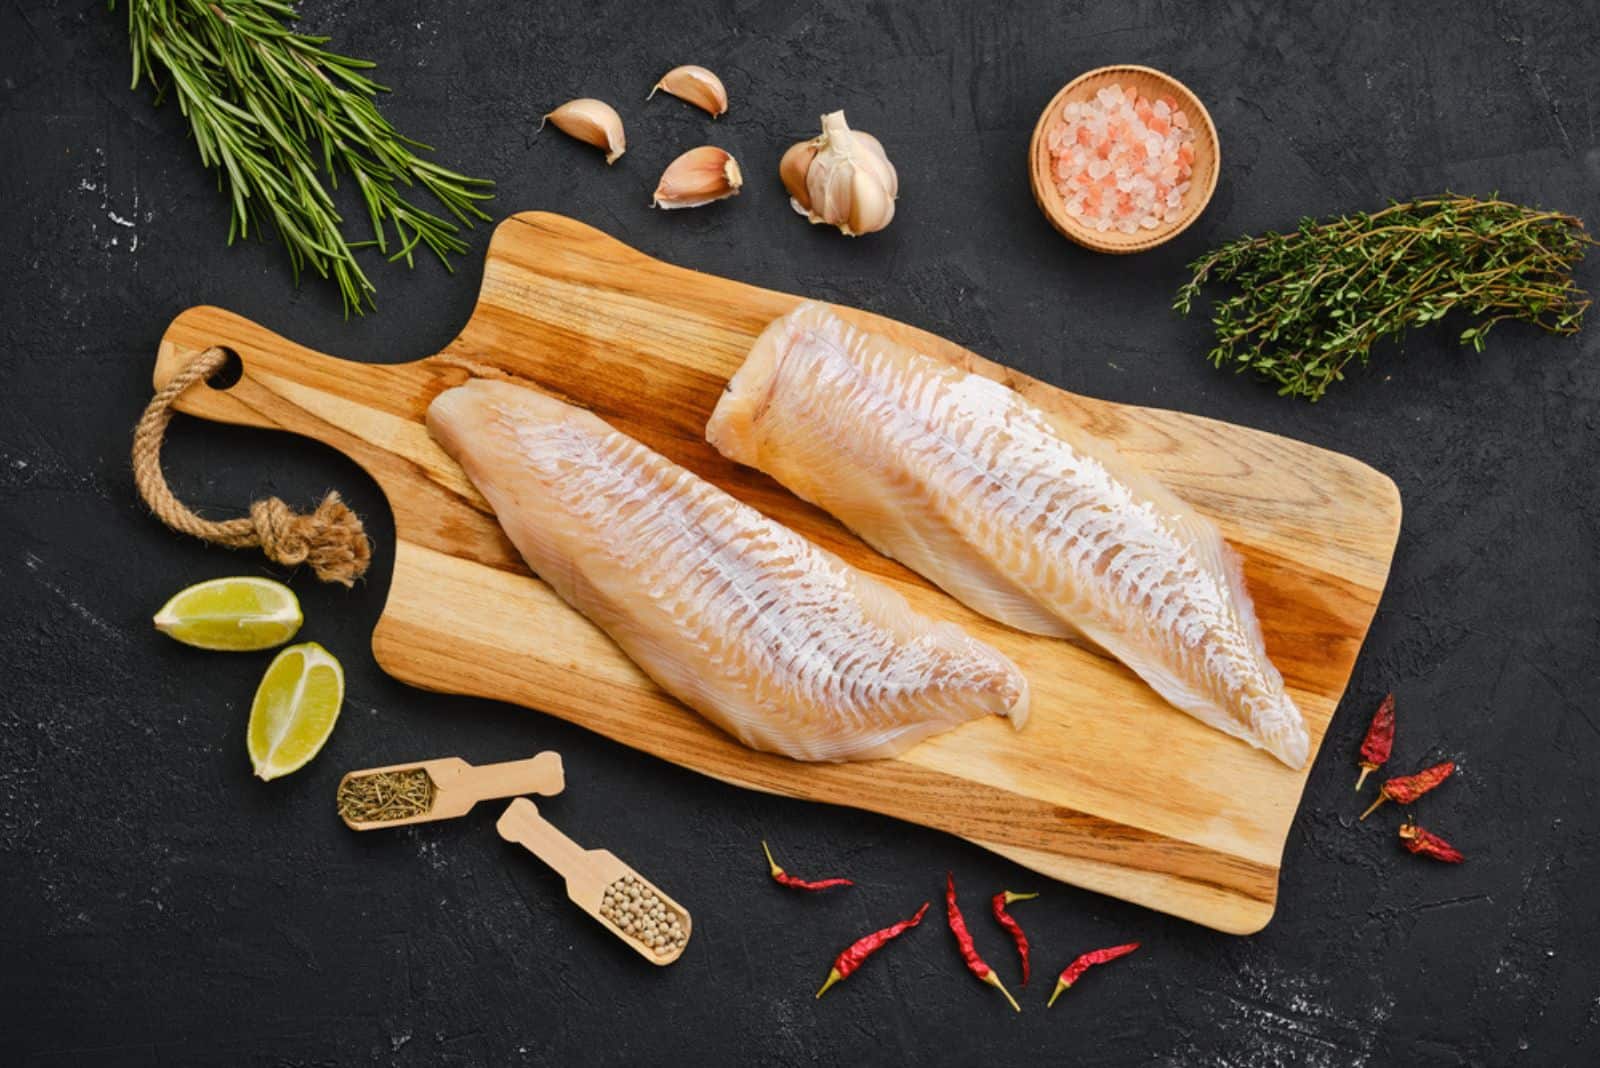 Top view of haddock fillet with seasoning on wooden cutting board
